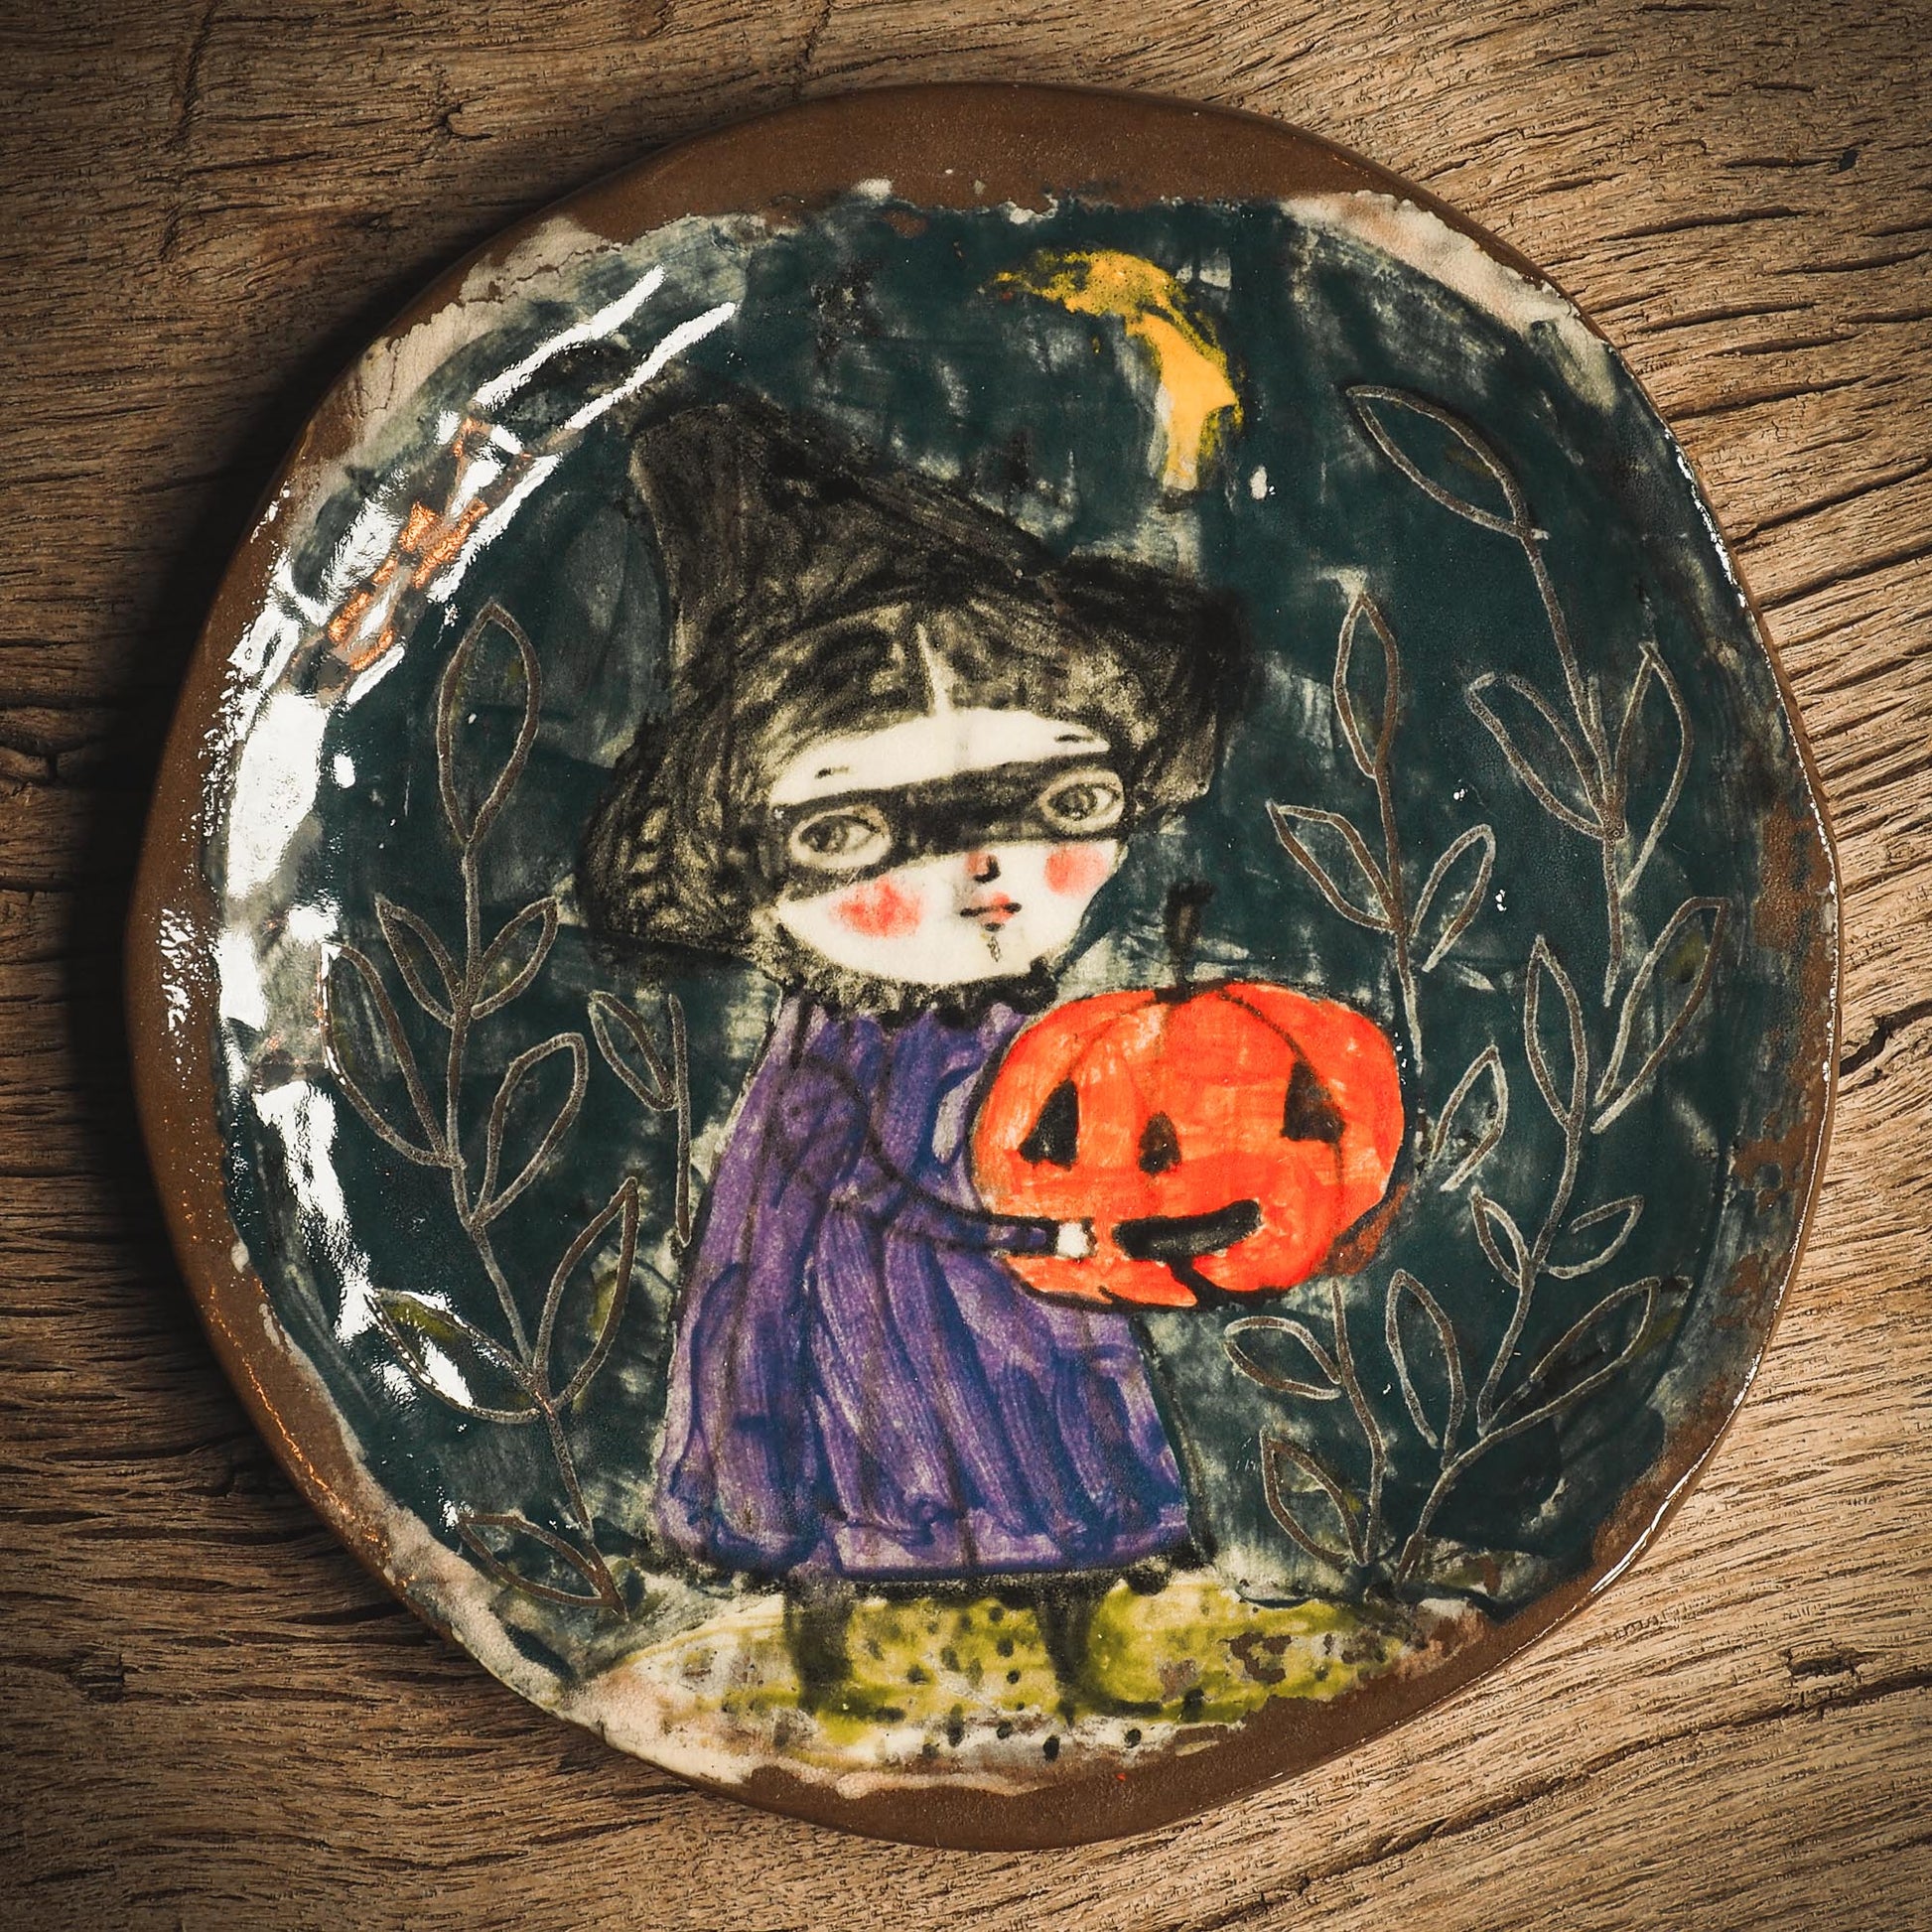 An original handmade Halloween ceramic dinner plate by Idania Salcido, Danita Art. Each plate is hand painted and glazed with pumpkins, witches, cats, jack-o-lanterns and moons. Made with fired glazed ceramics, this little witch, jack-o-lantern and cat plate is painted with delicate patterns that make it one of a kind artwork.